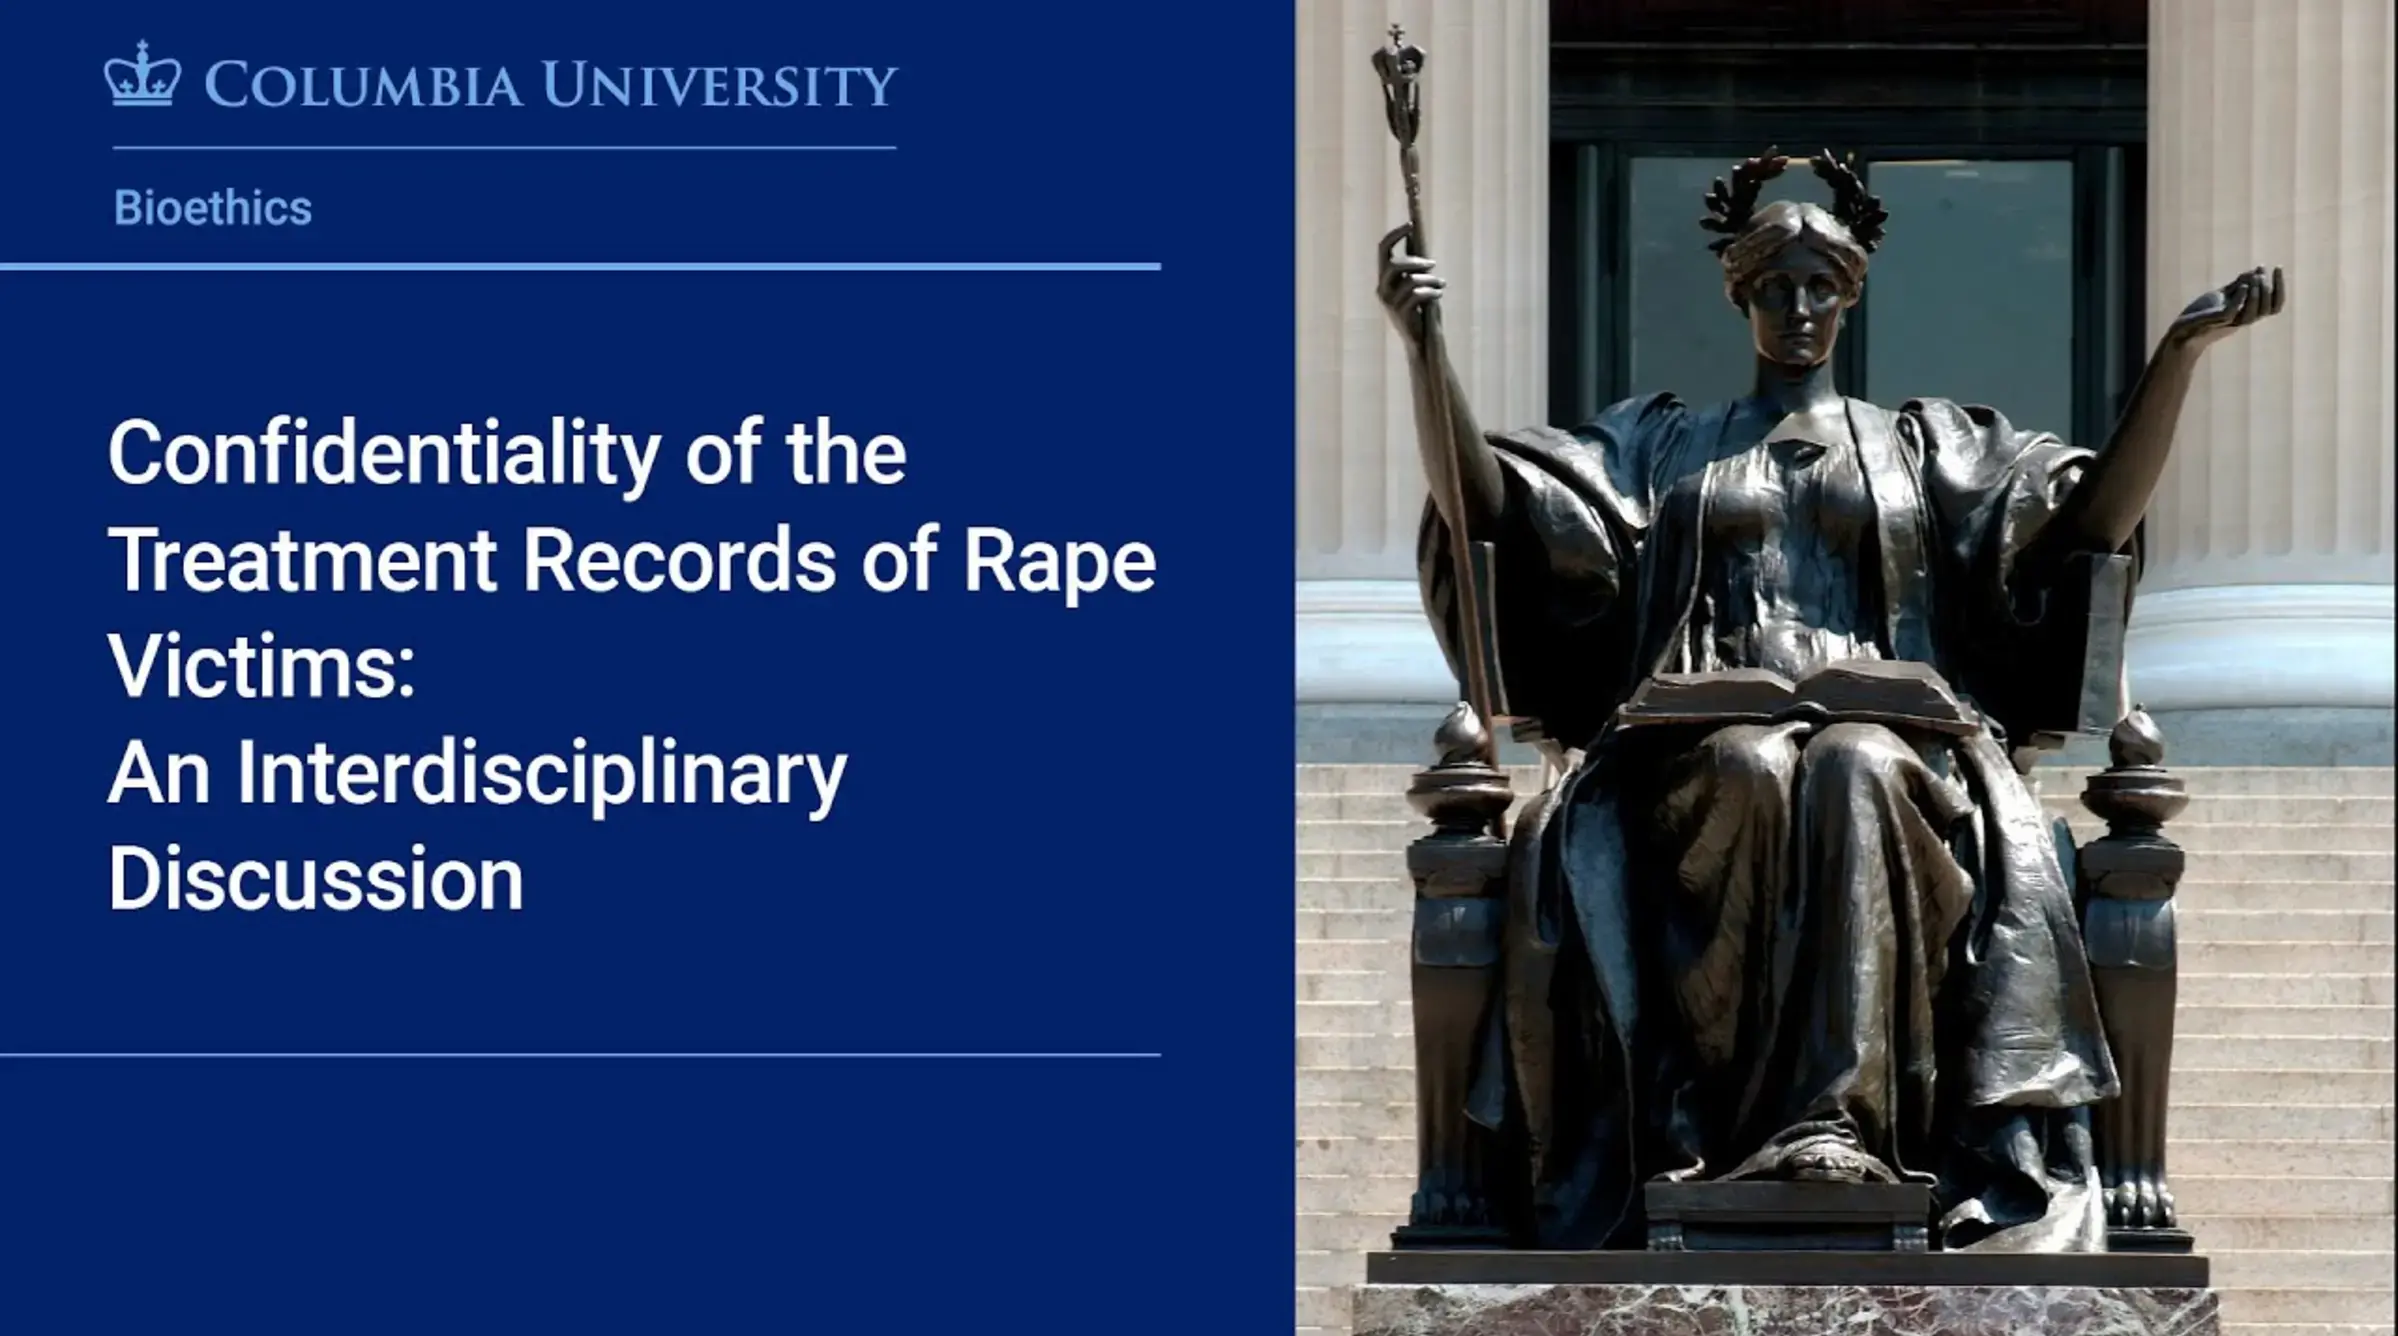 Confidentiality of the Treatment Records of Rape Victims: An Interdisciplinary Discussion